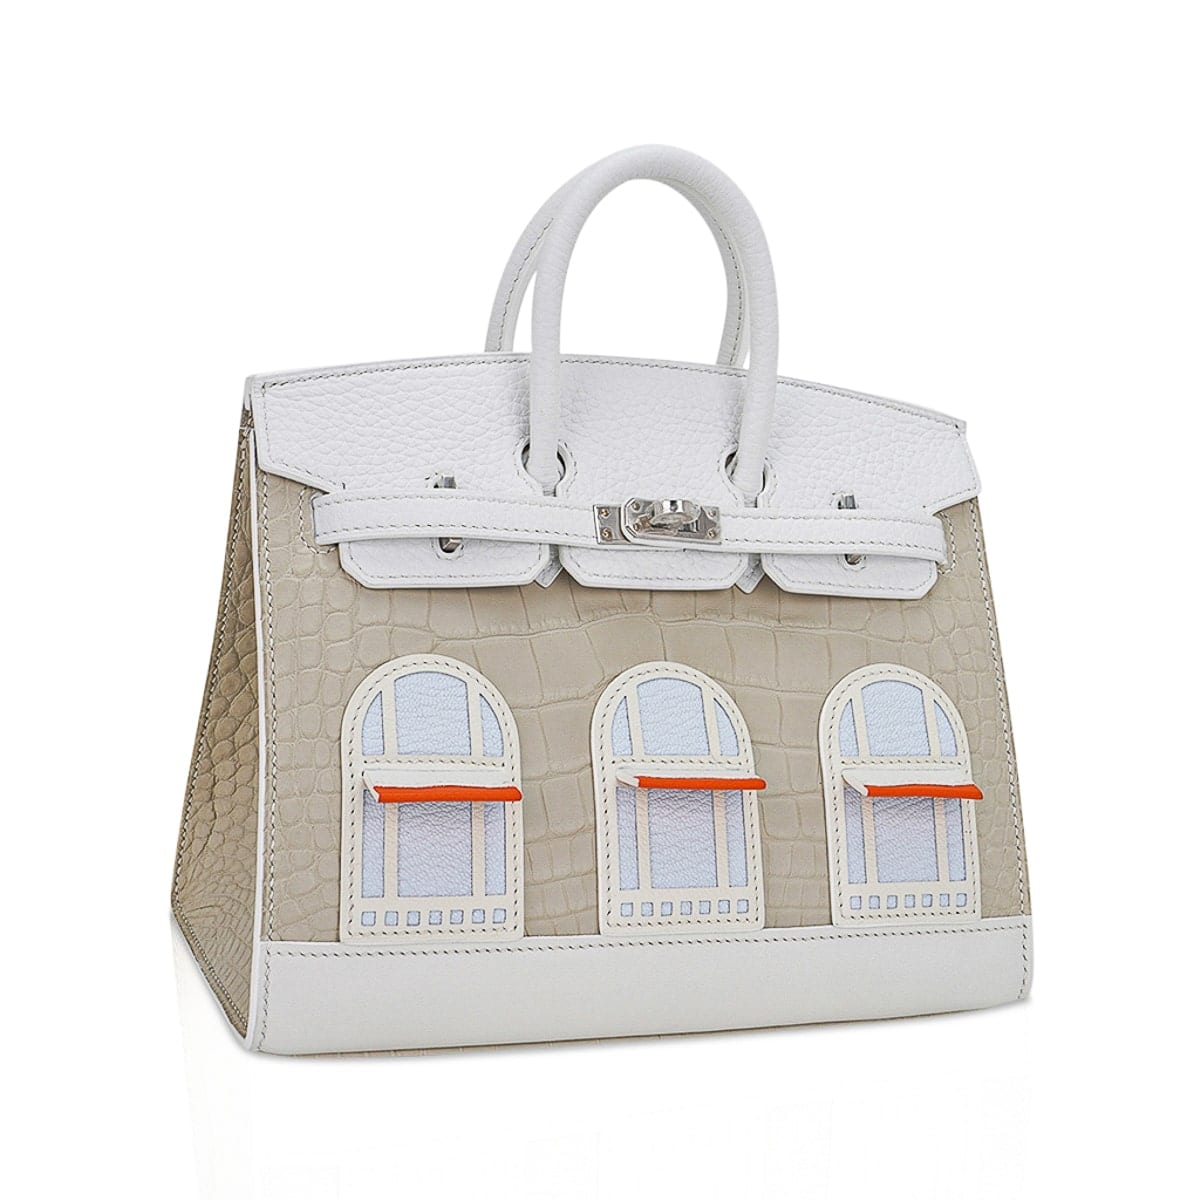 Hermes Limited Edition Birkin 20 Sellier Bag Neige (Snow) White Faubourg  House Matte Alligator